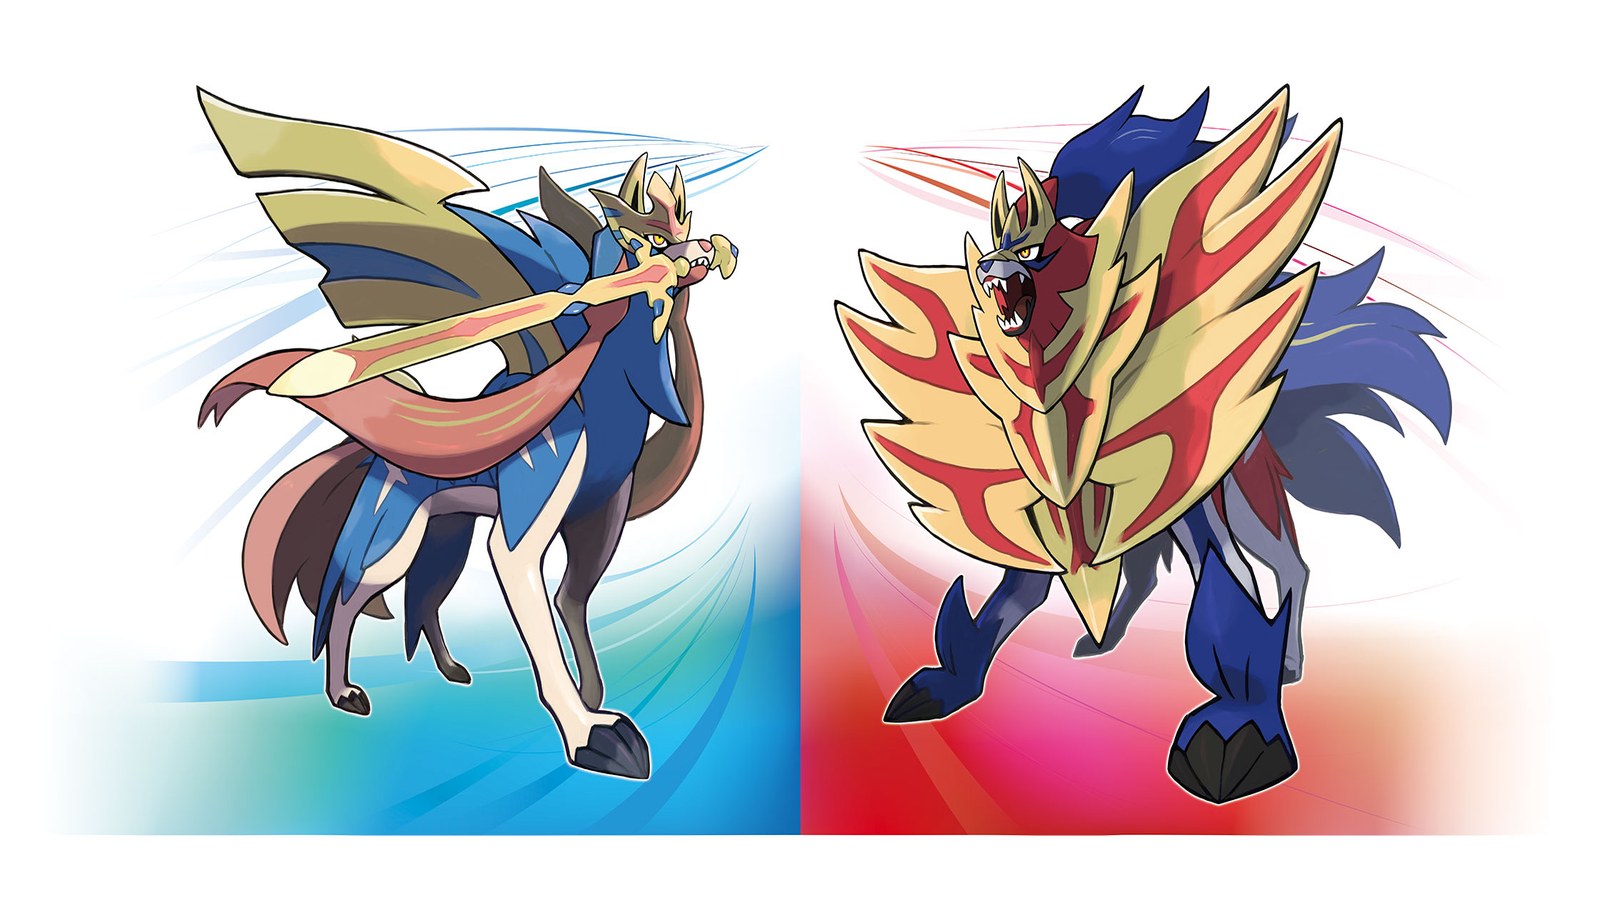 Every Legendary Pokemon Revealed Since the Release of Sword and Shield